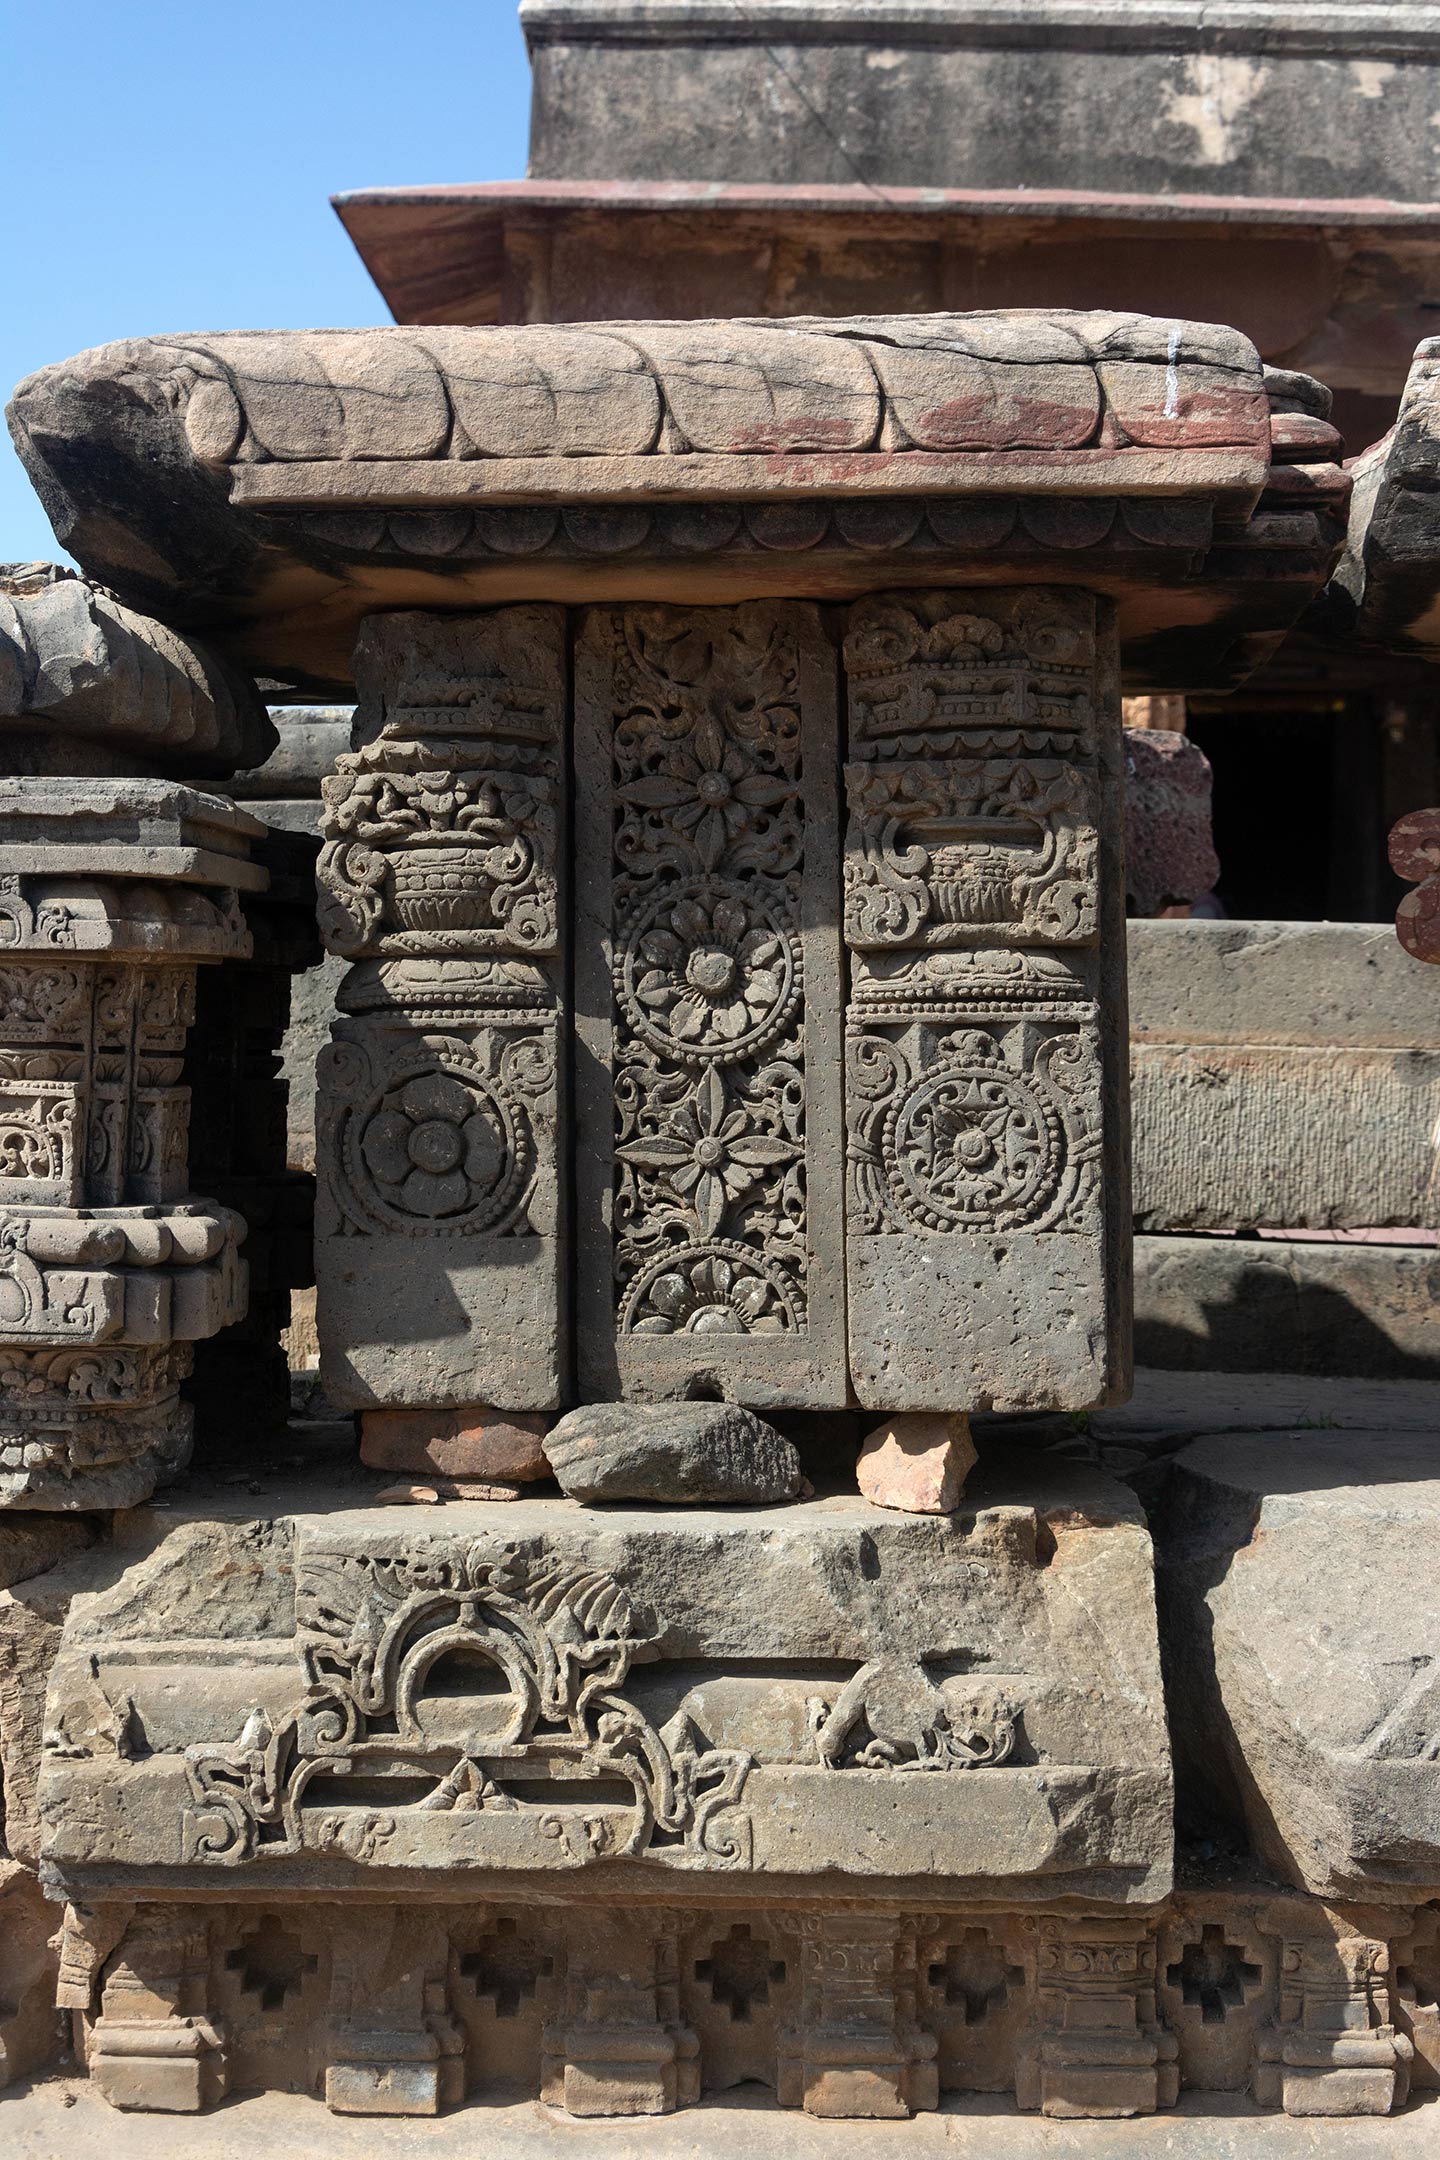 Broken fragments and debris from the original temple assembled on the east face of the adhisthana.